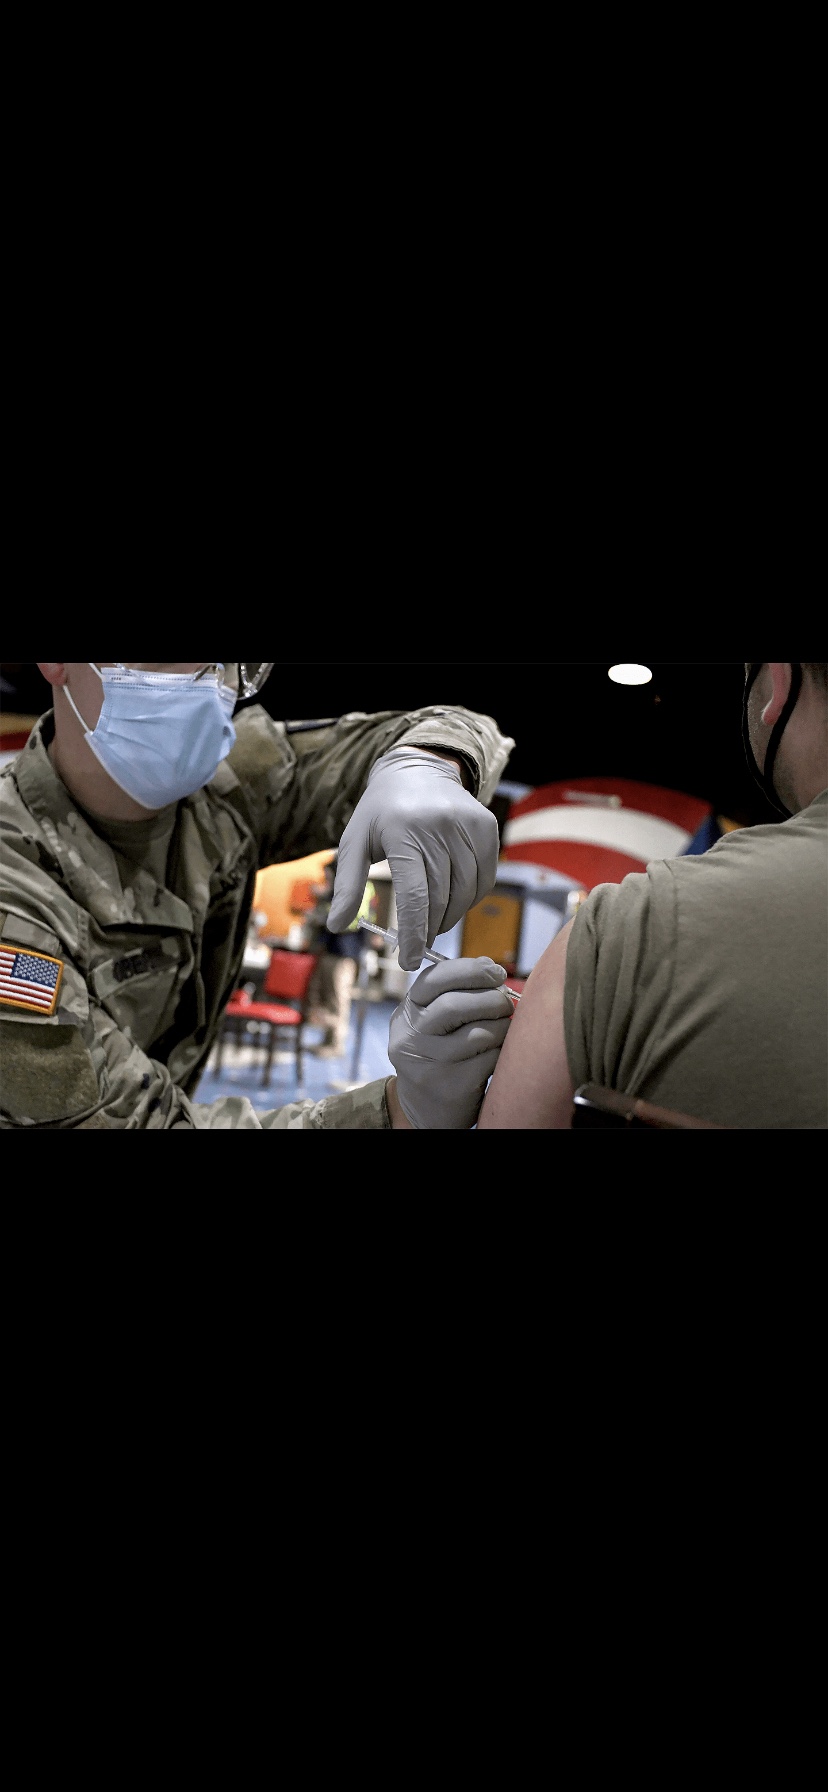 PENTAGON “CORRECTS” ITS DATABASE AFTER ATTORNEY PRESENTS HORROWING VACCINE SIDE EFFECT DATA